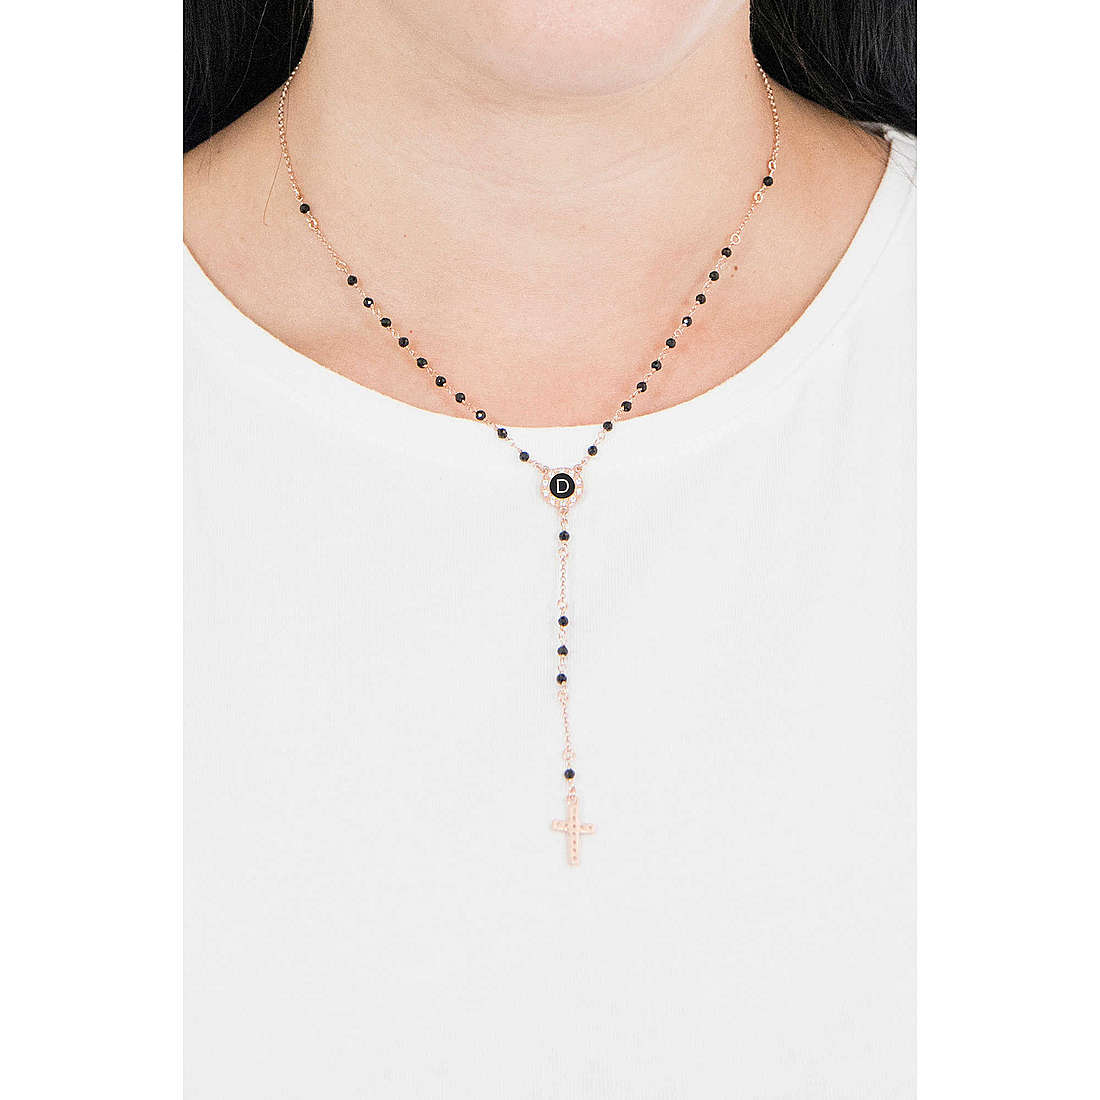 Dvccio necklaces Heave woman CRBPAGRN-d wearing